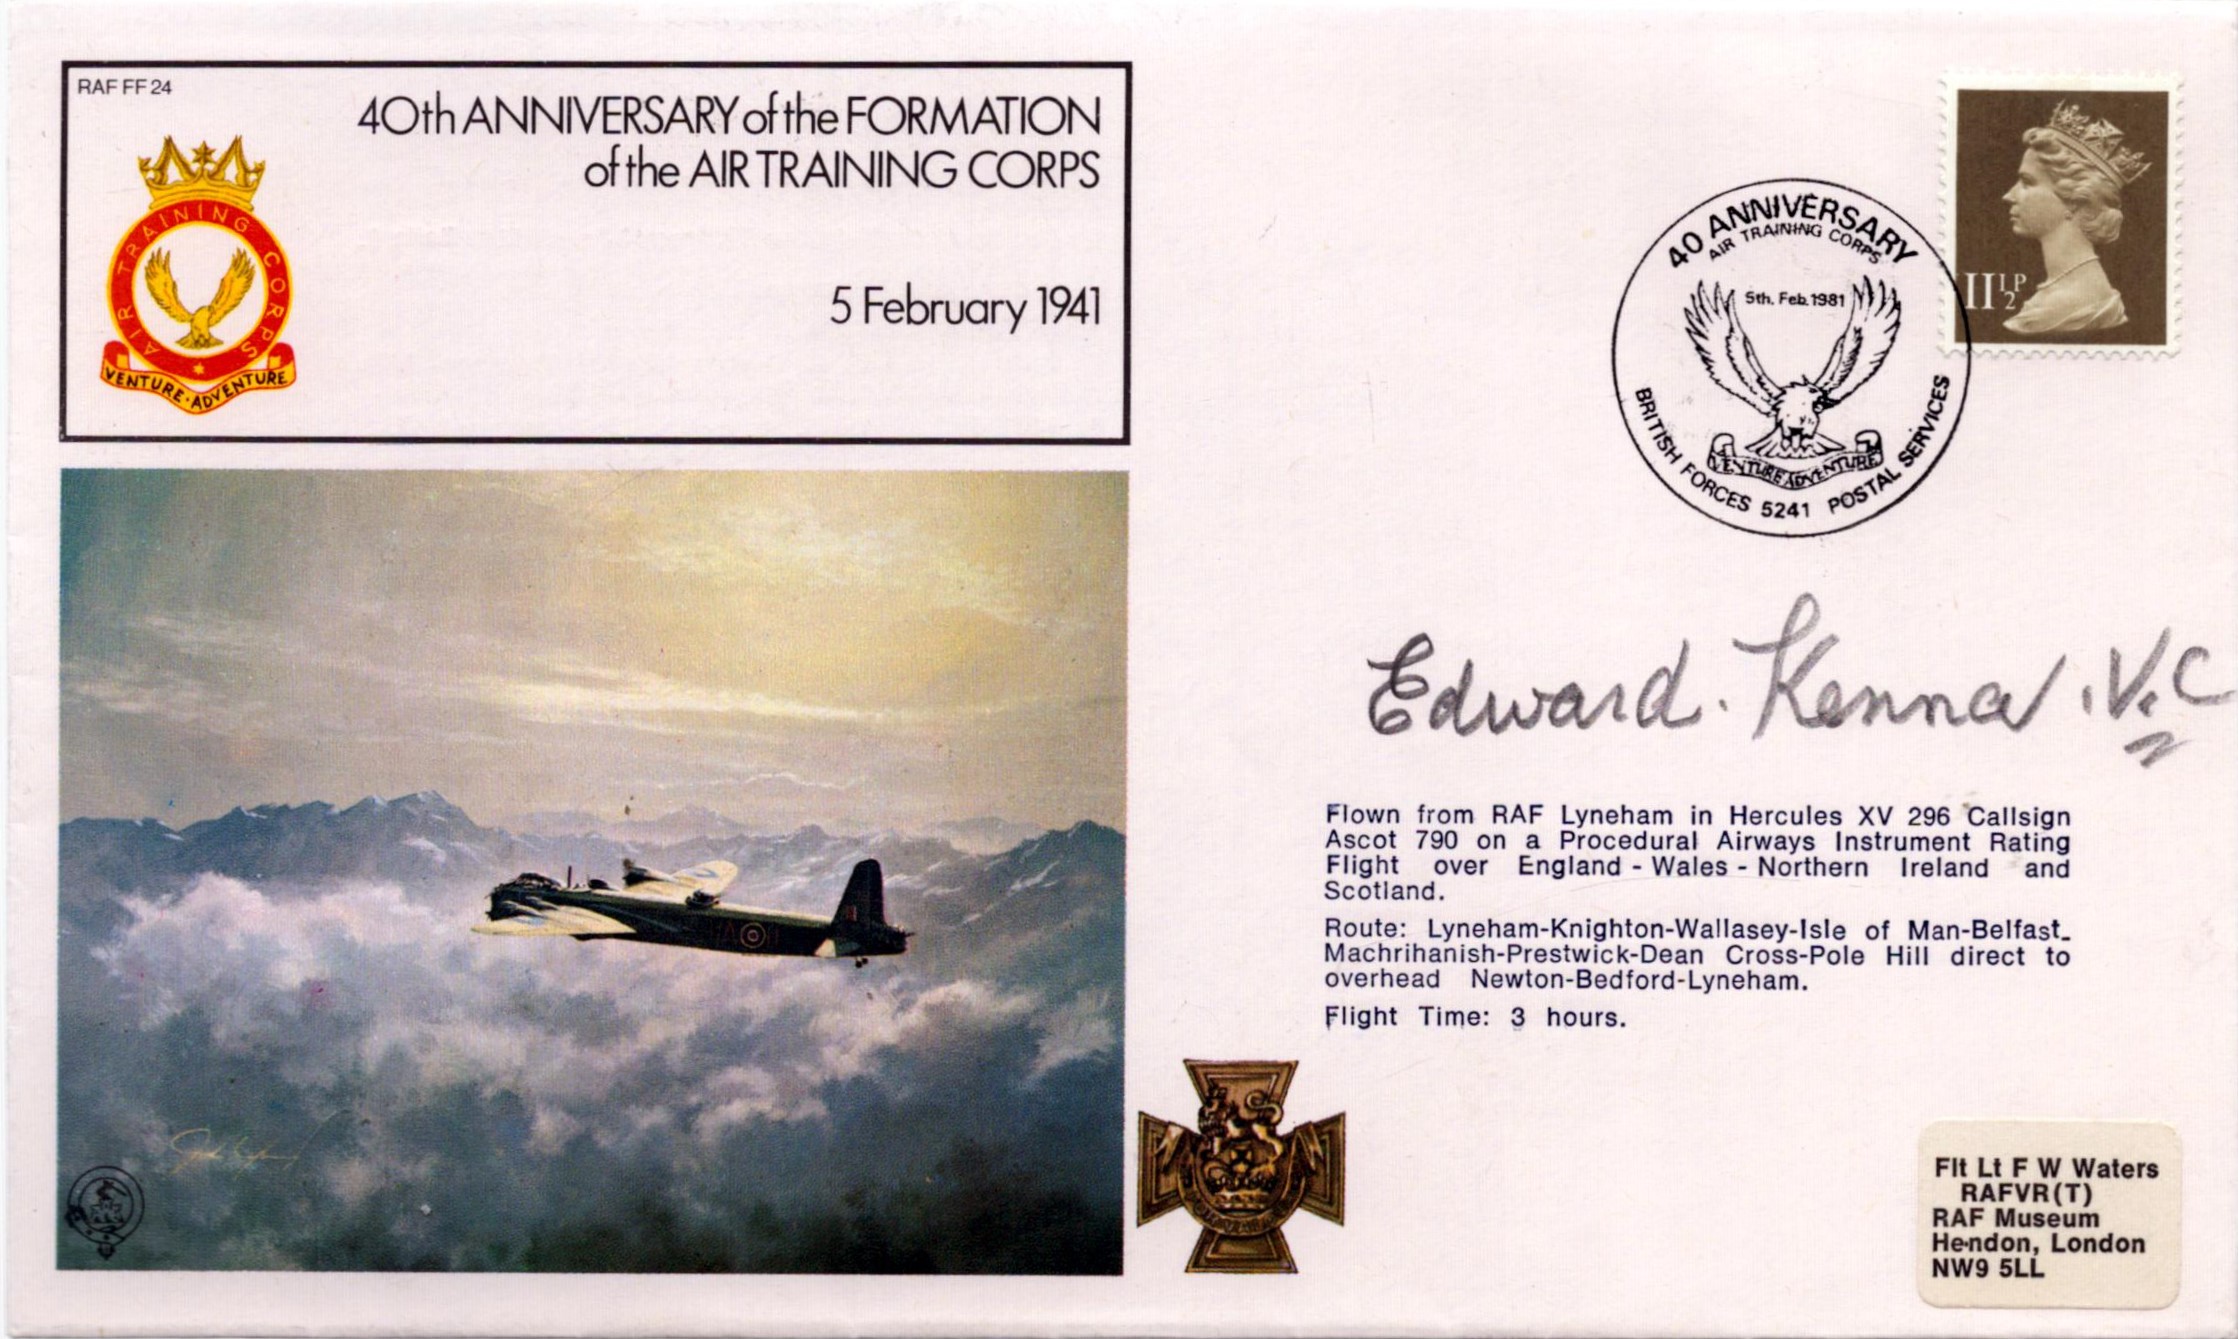 WWII Private Edward Kenna VC signed 40th Anniversary of the Formation of the Air Training Corps 5 - Image 2 of 3